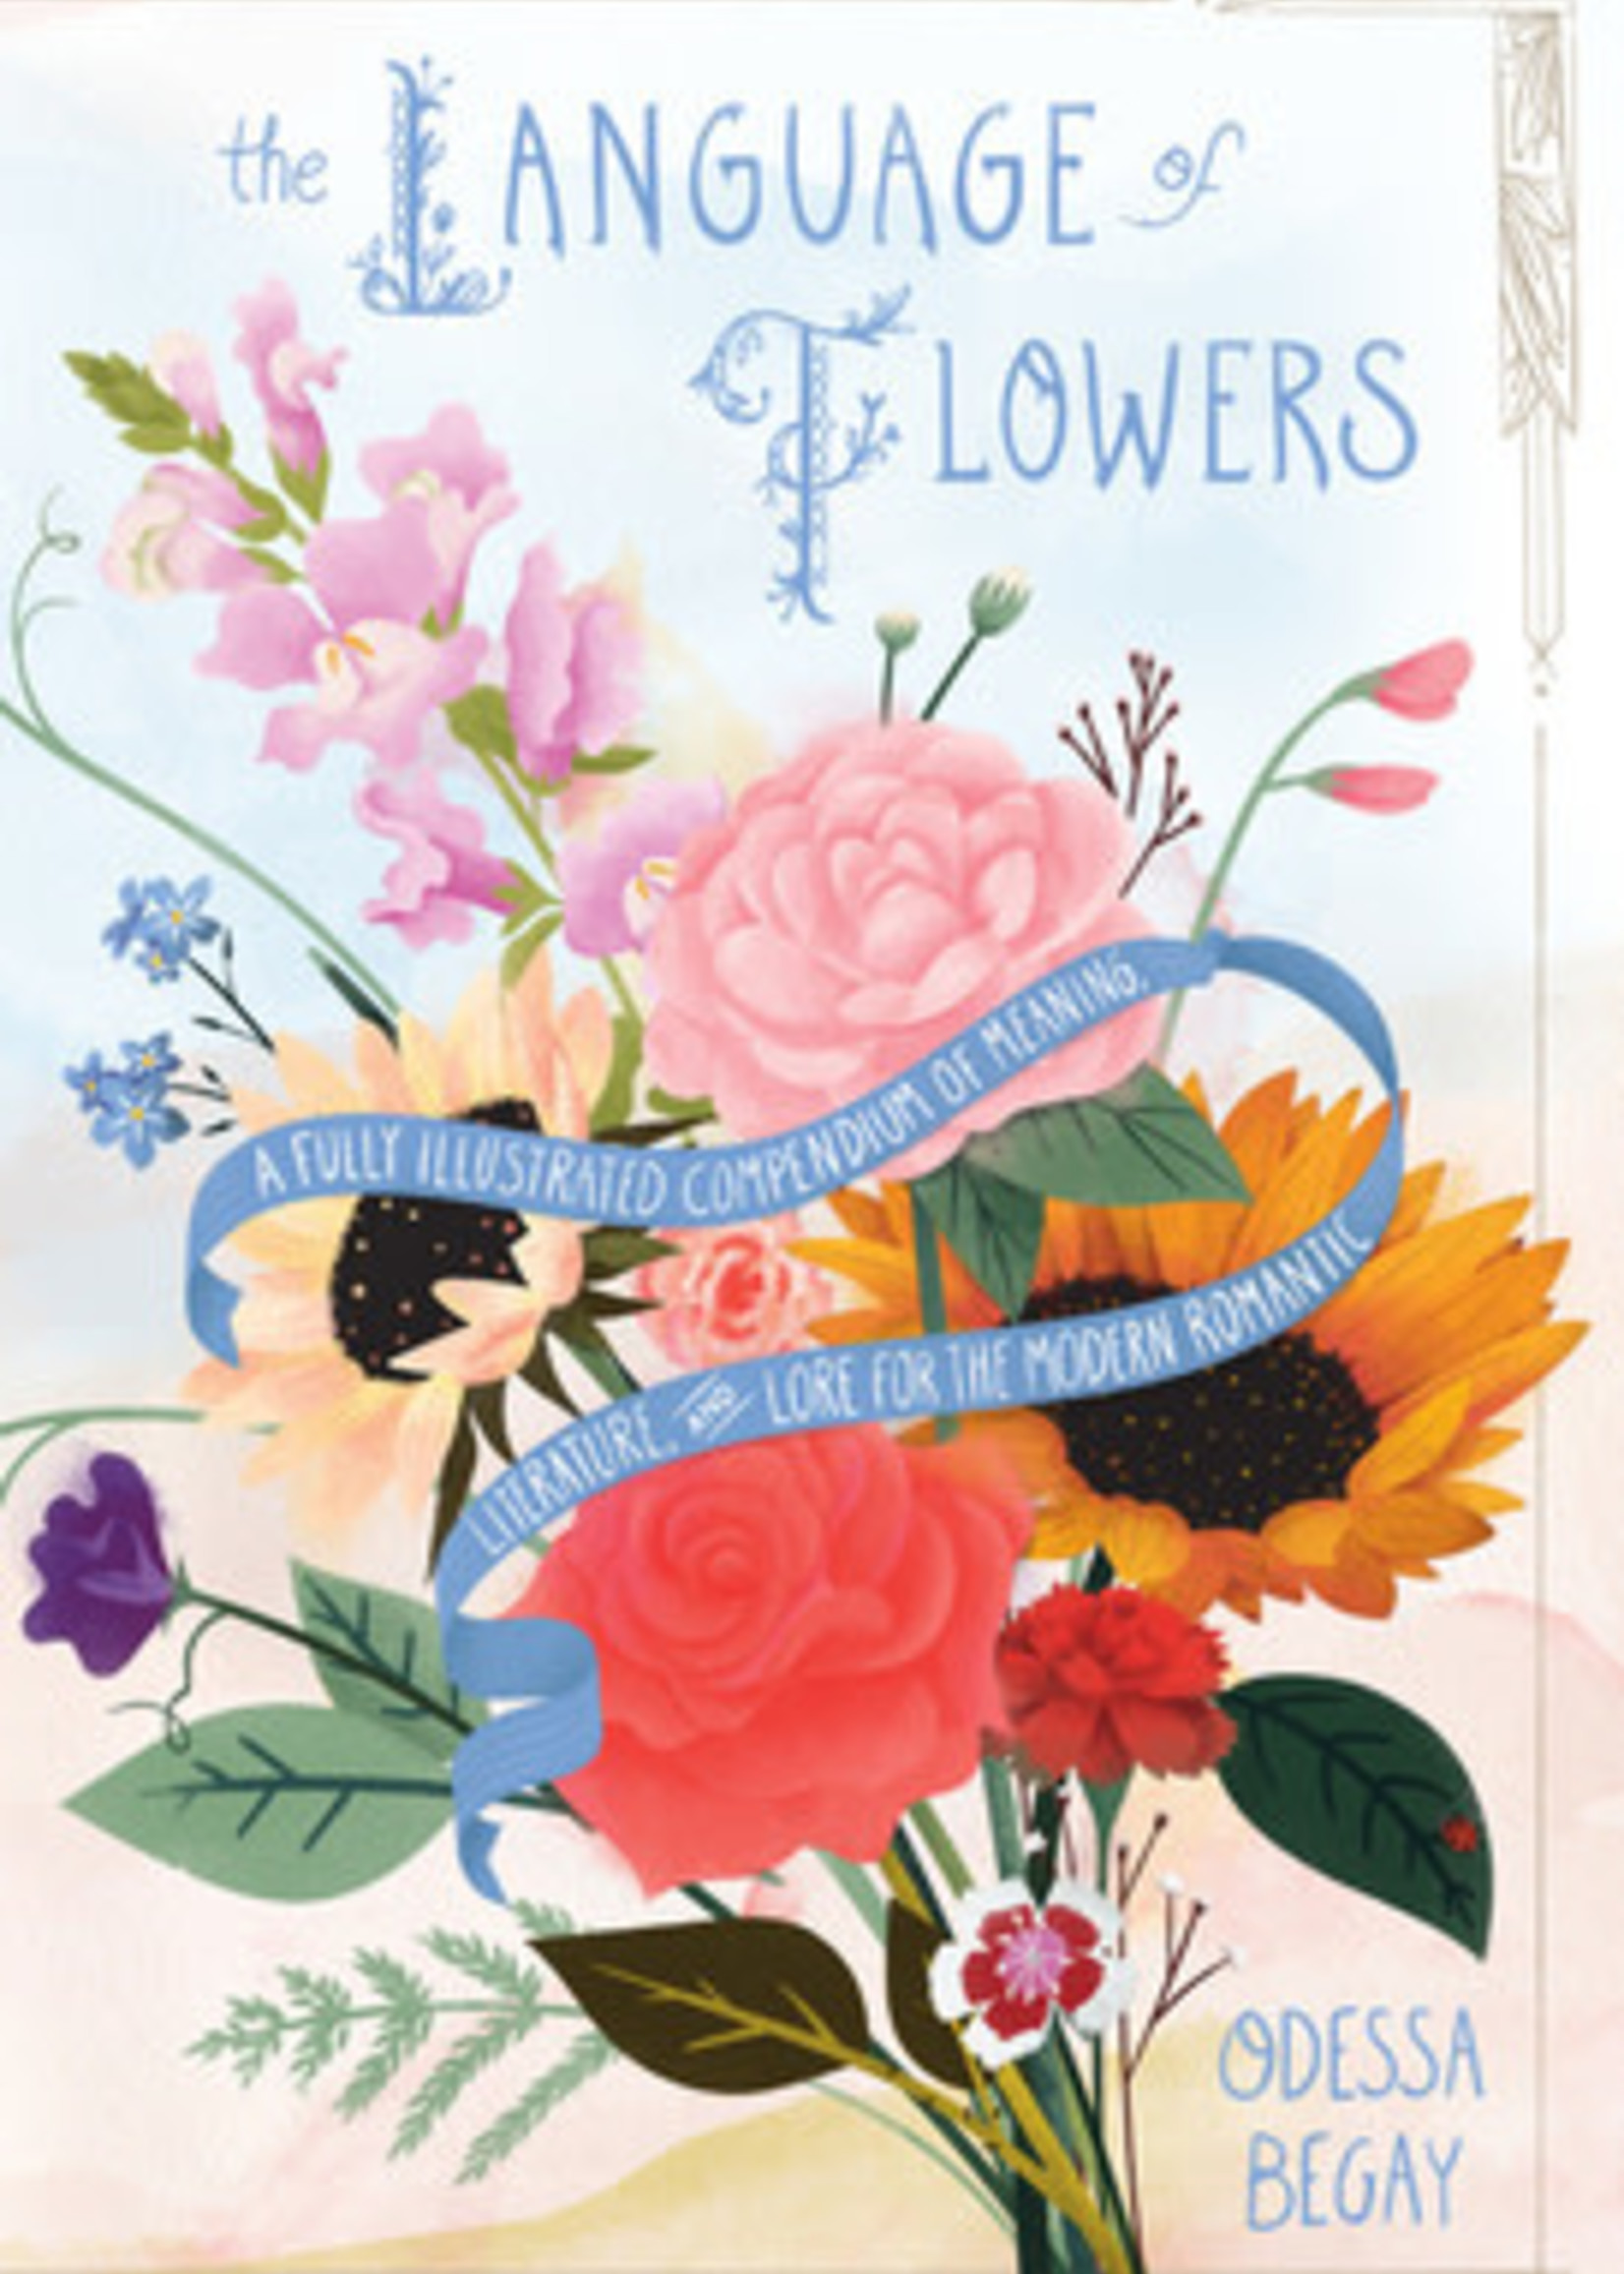 The Language of Flowers: A Fully Illustrated Compendium of Meaning, Literature, and Lore for the Modern Romantic by Odessa Begay